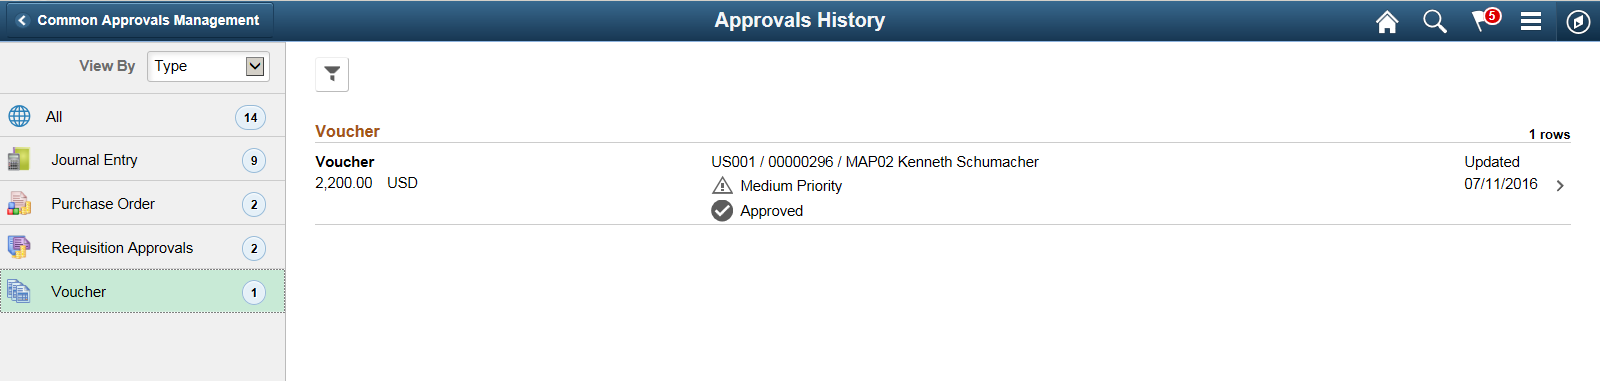 Approvals History page